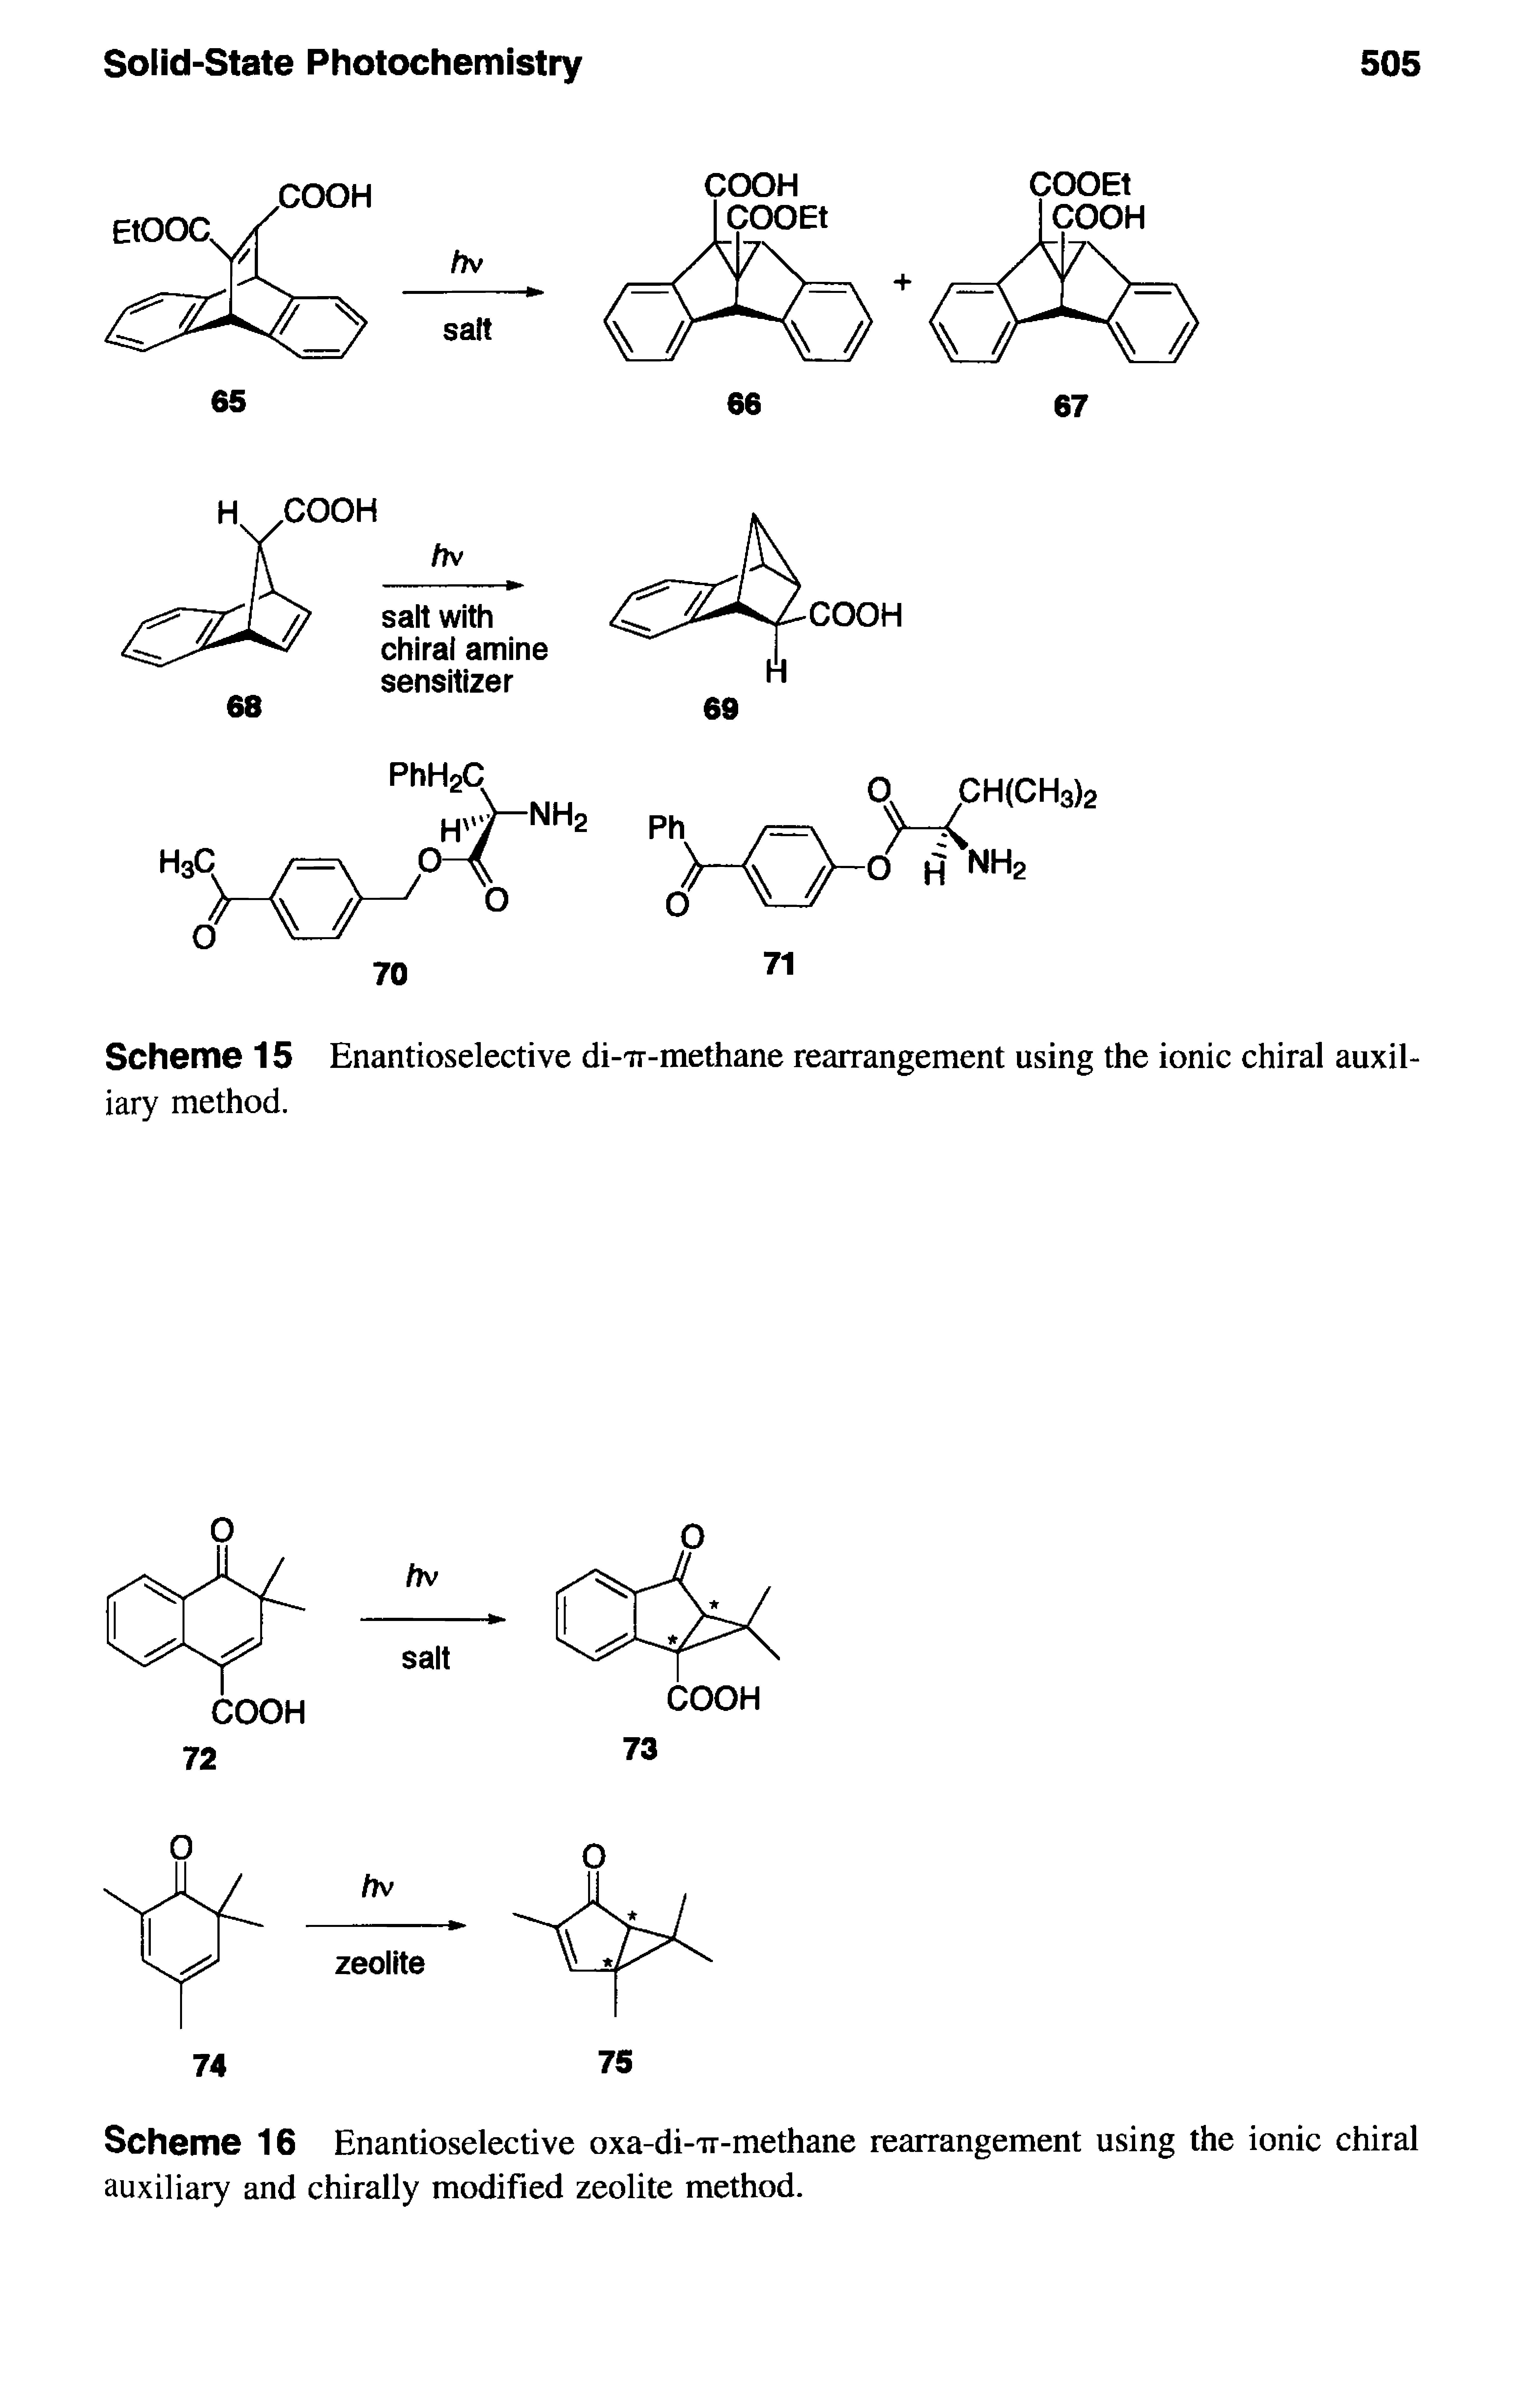 Scheme 16 Enantioselective oxa-di-Tr-methane rearrangement using the ionic chiral auxiliary and chirally modified zeolite method.